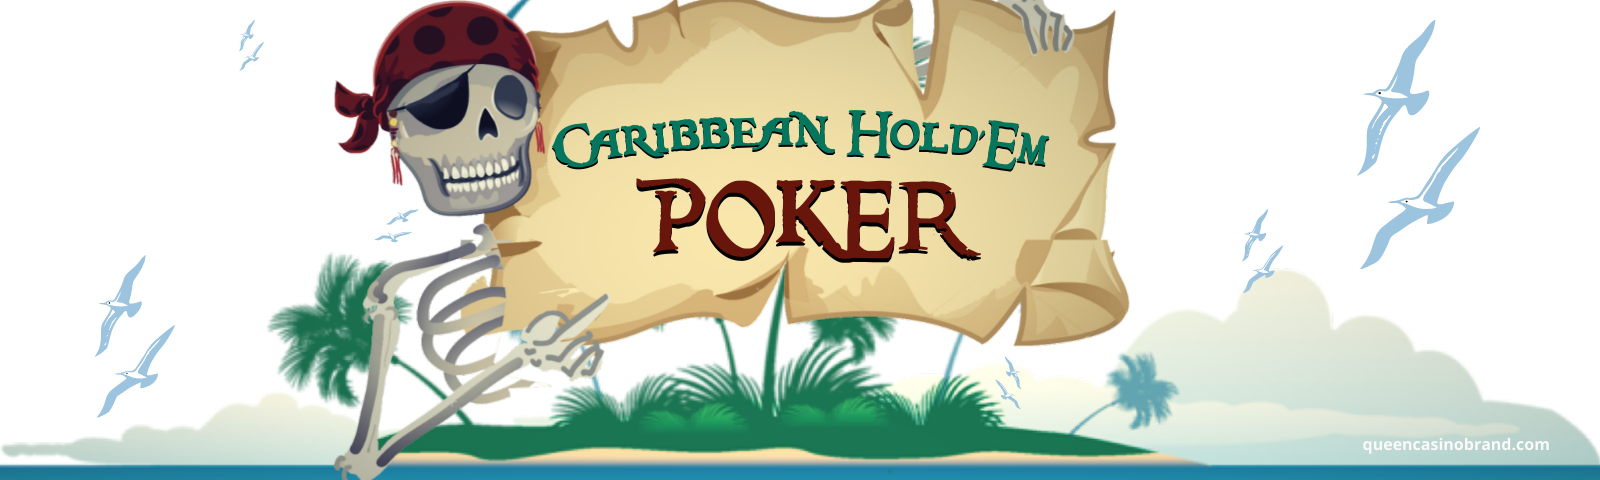 Caribbean Hold'em Complete Guide | Queen Casino Brand